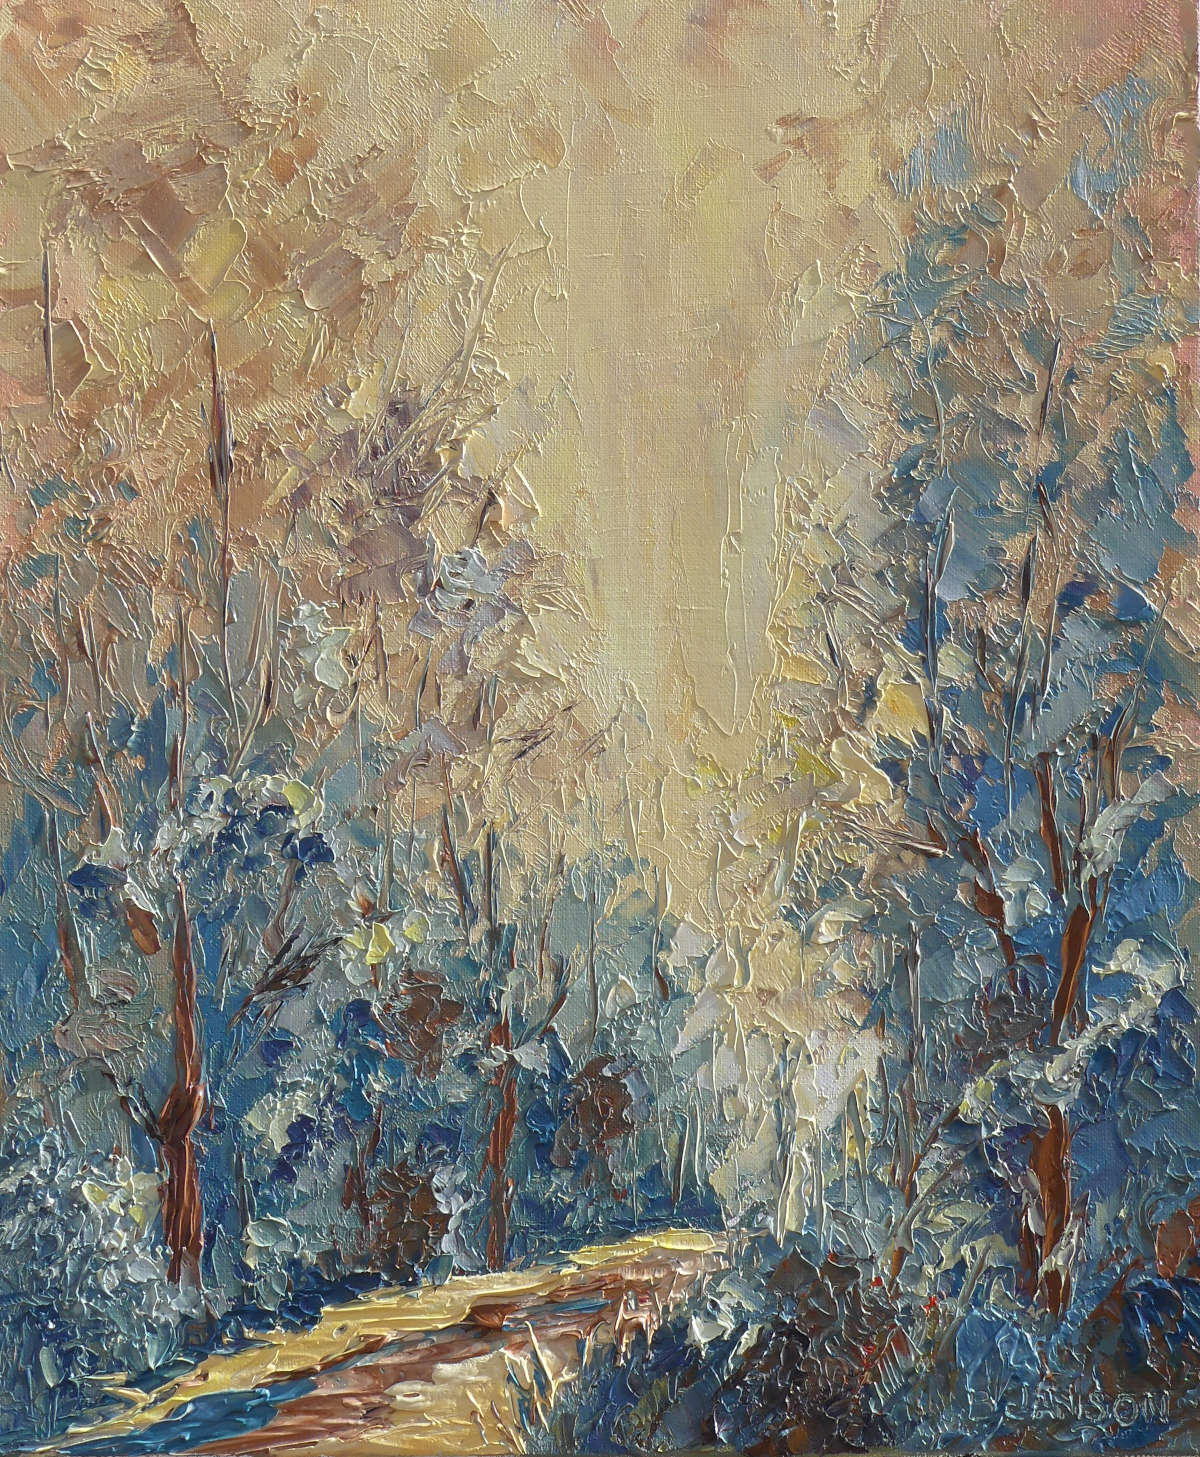 modern palette knife painting on canvas showing a trail in a forest